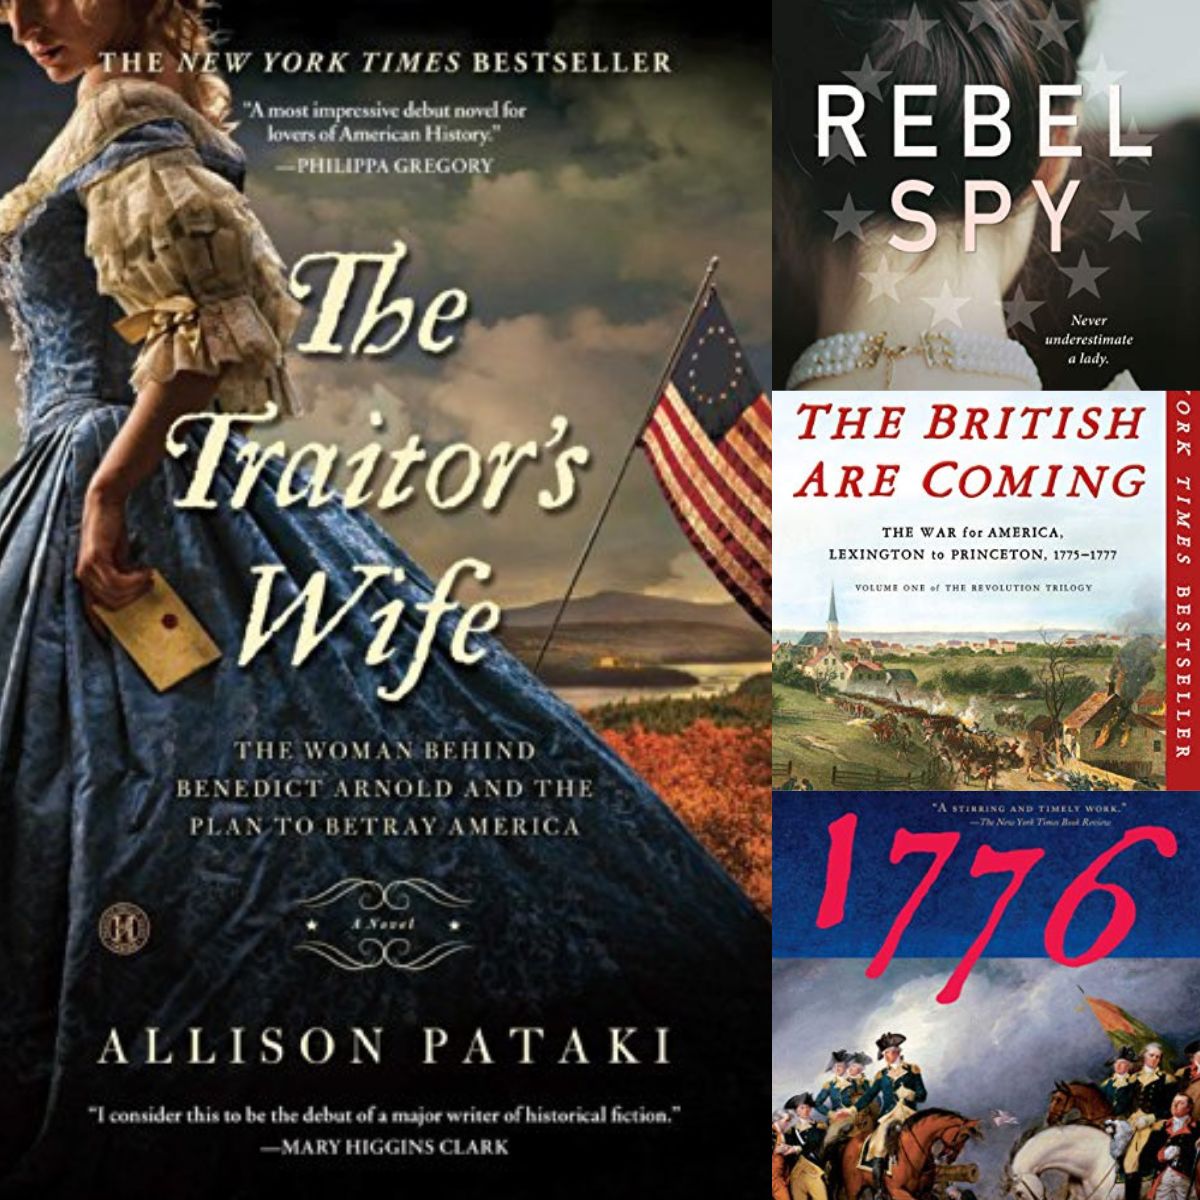 A collage of 4 photos of historical fiction books about the American Revolution